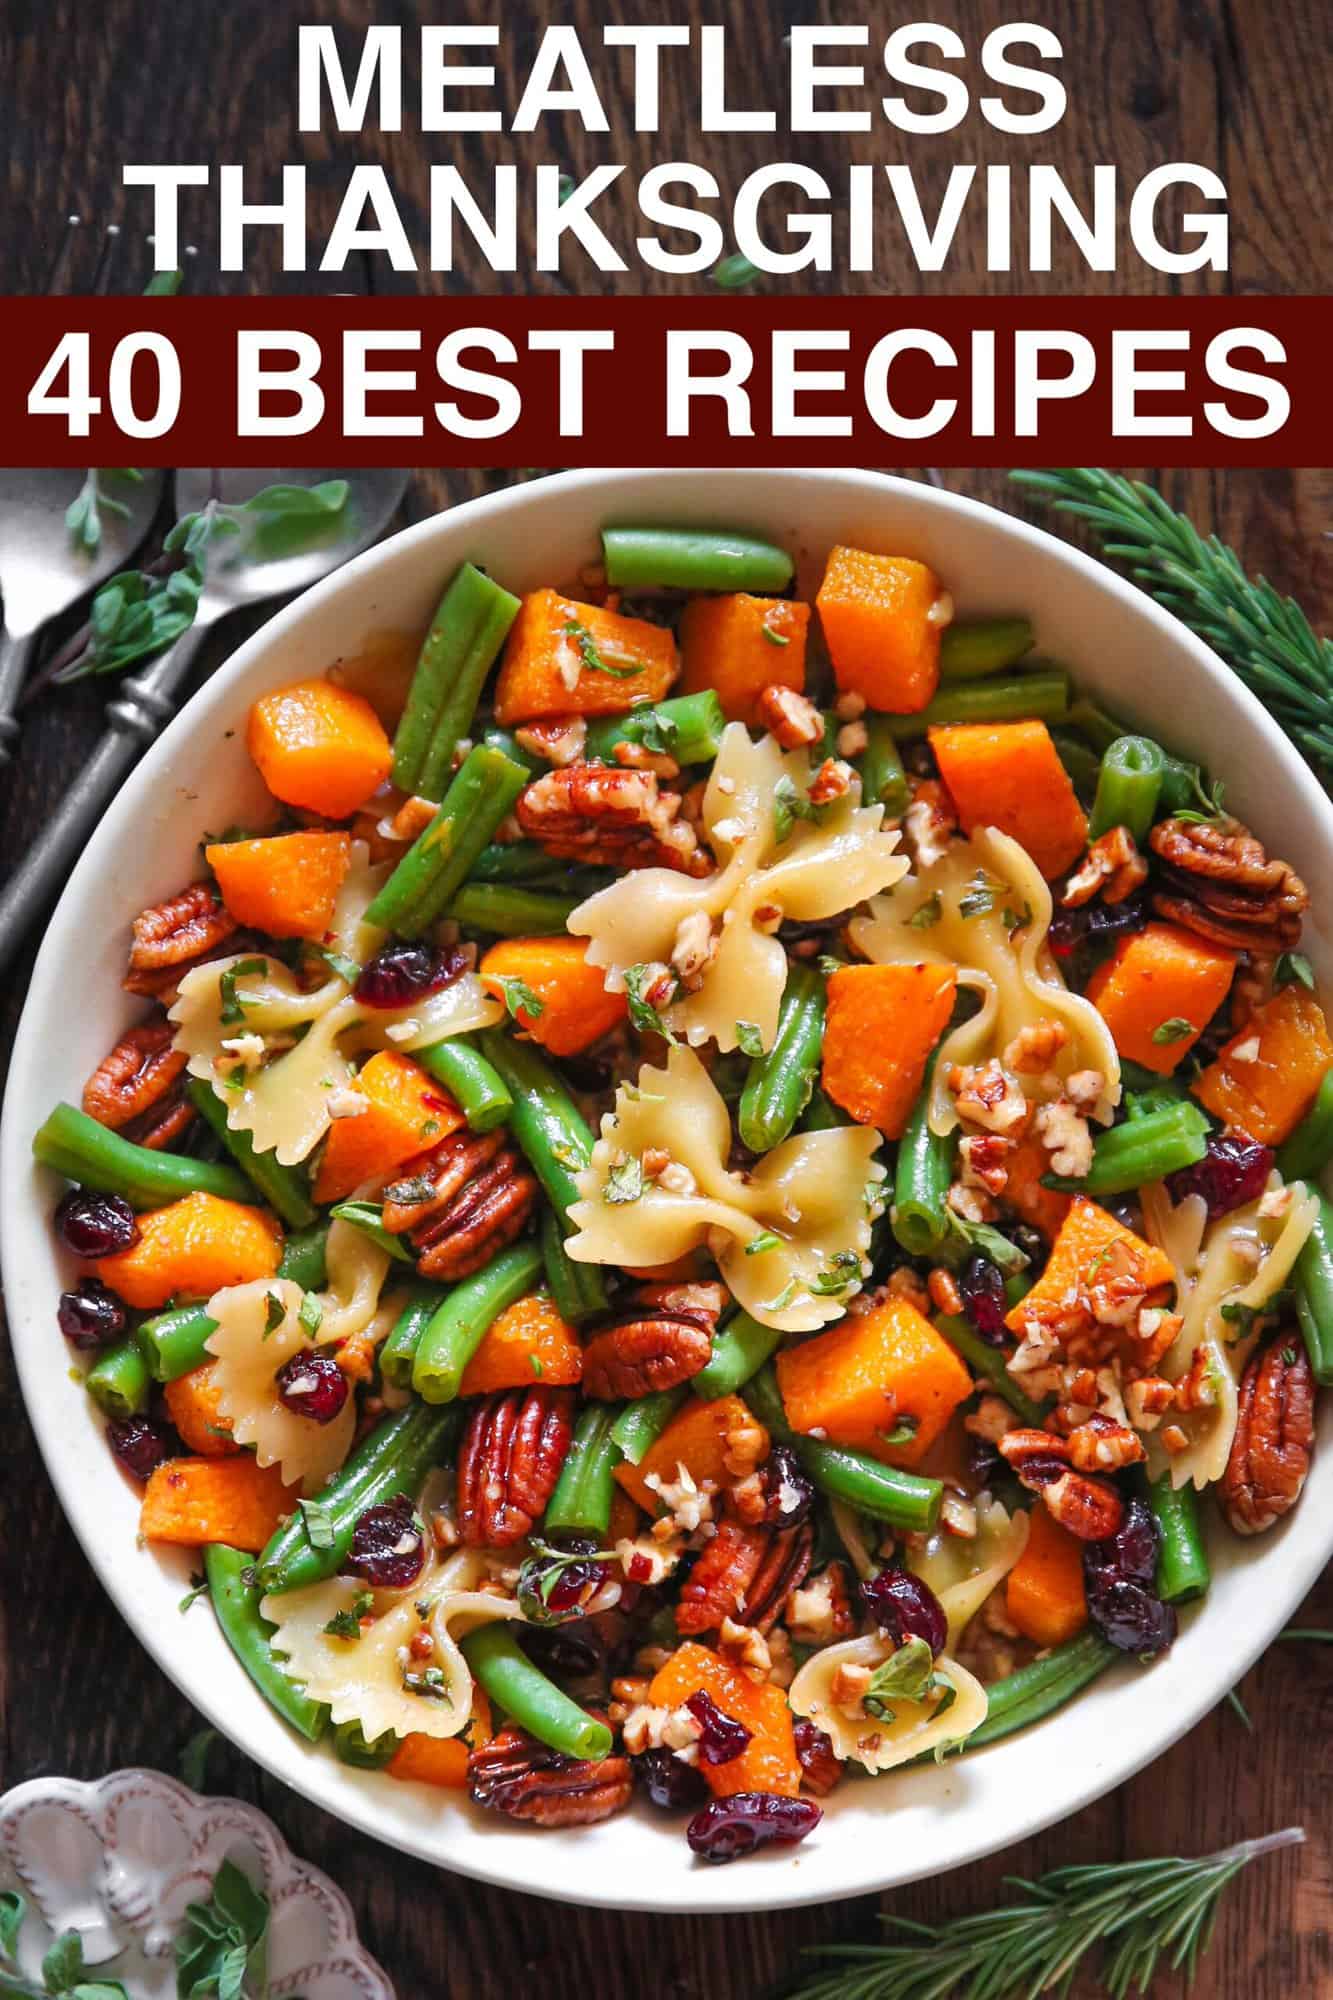 Bow Tie Pasta Salad with Roasted Butternut Squash, Green Beans, Pecans, and Dried Cranberries - in a white bowl.